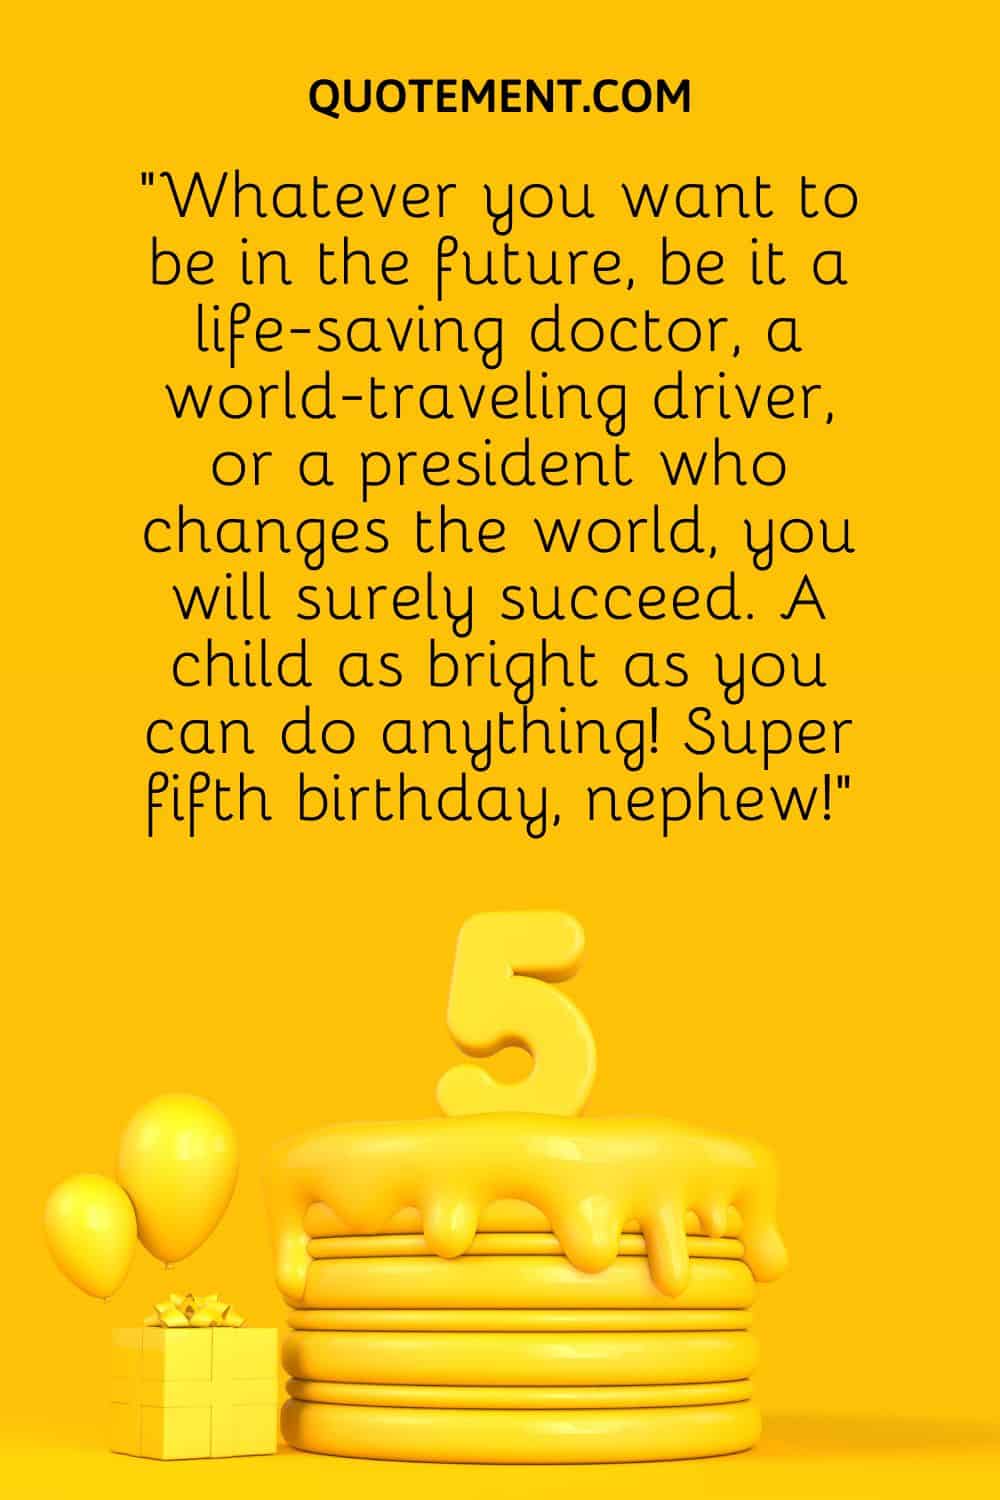 “Whatever you want to be in the future, be it a life-saving doctor, a world-traveling driver, or a president who changes the world, you will surely succeed.